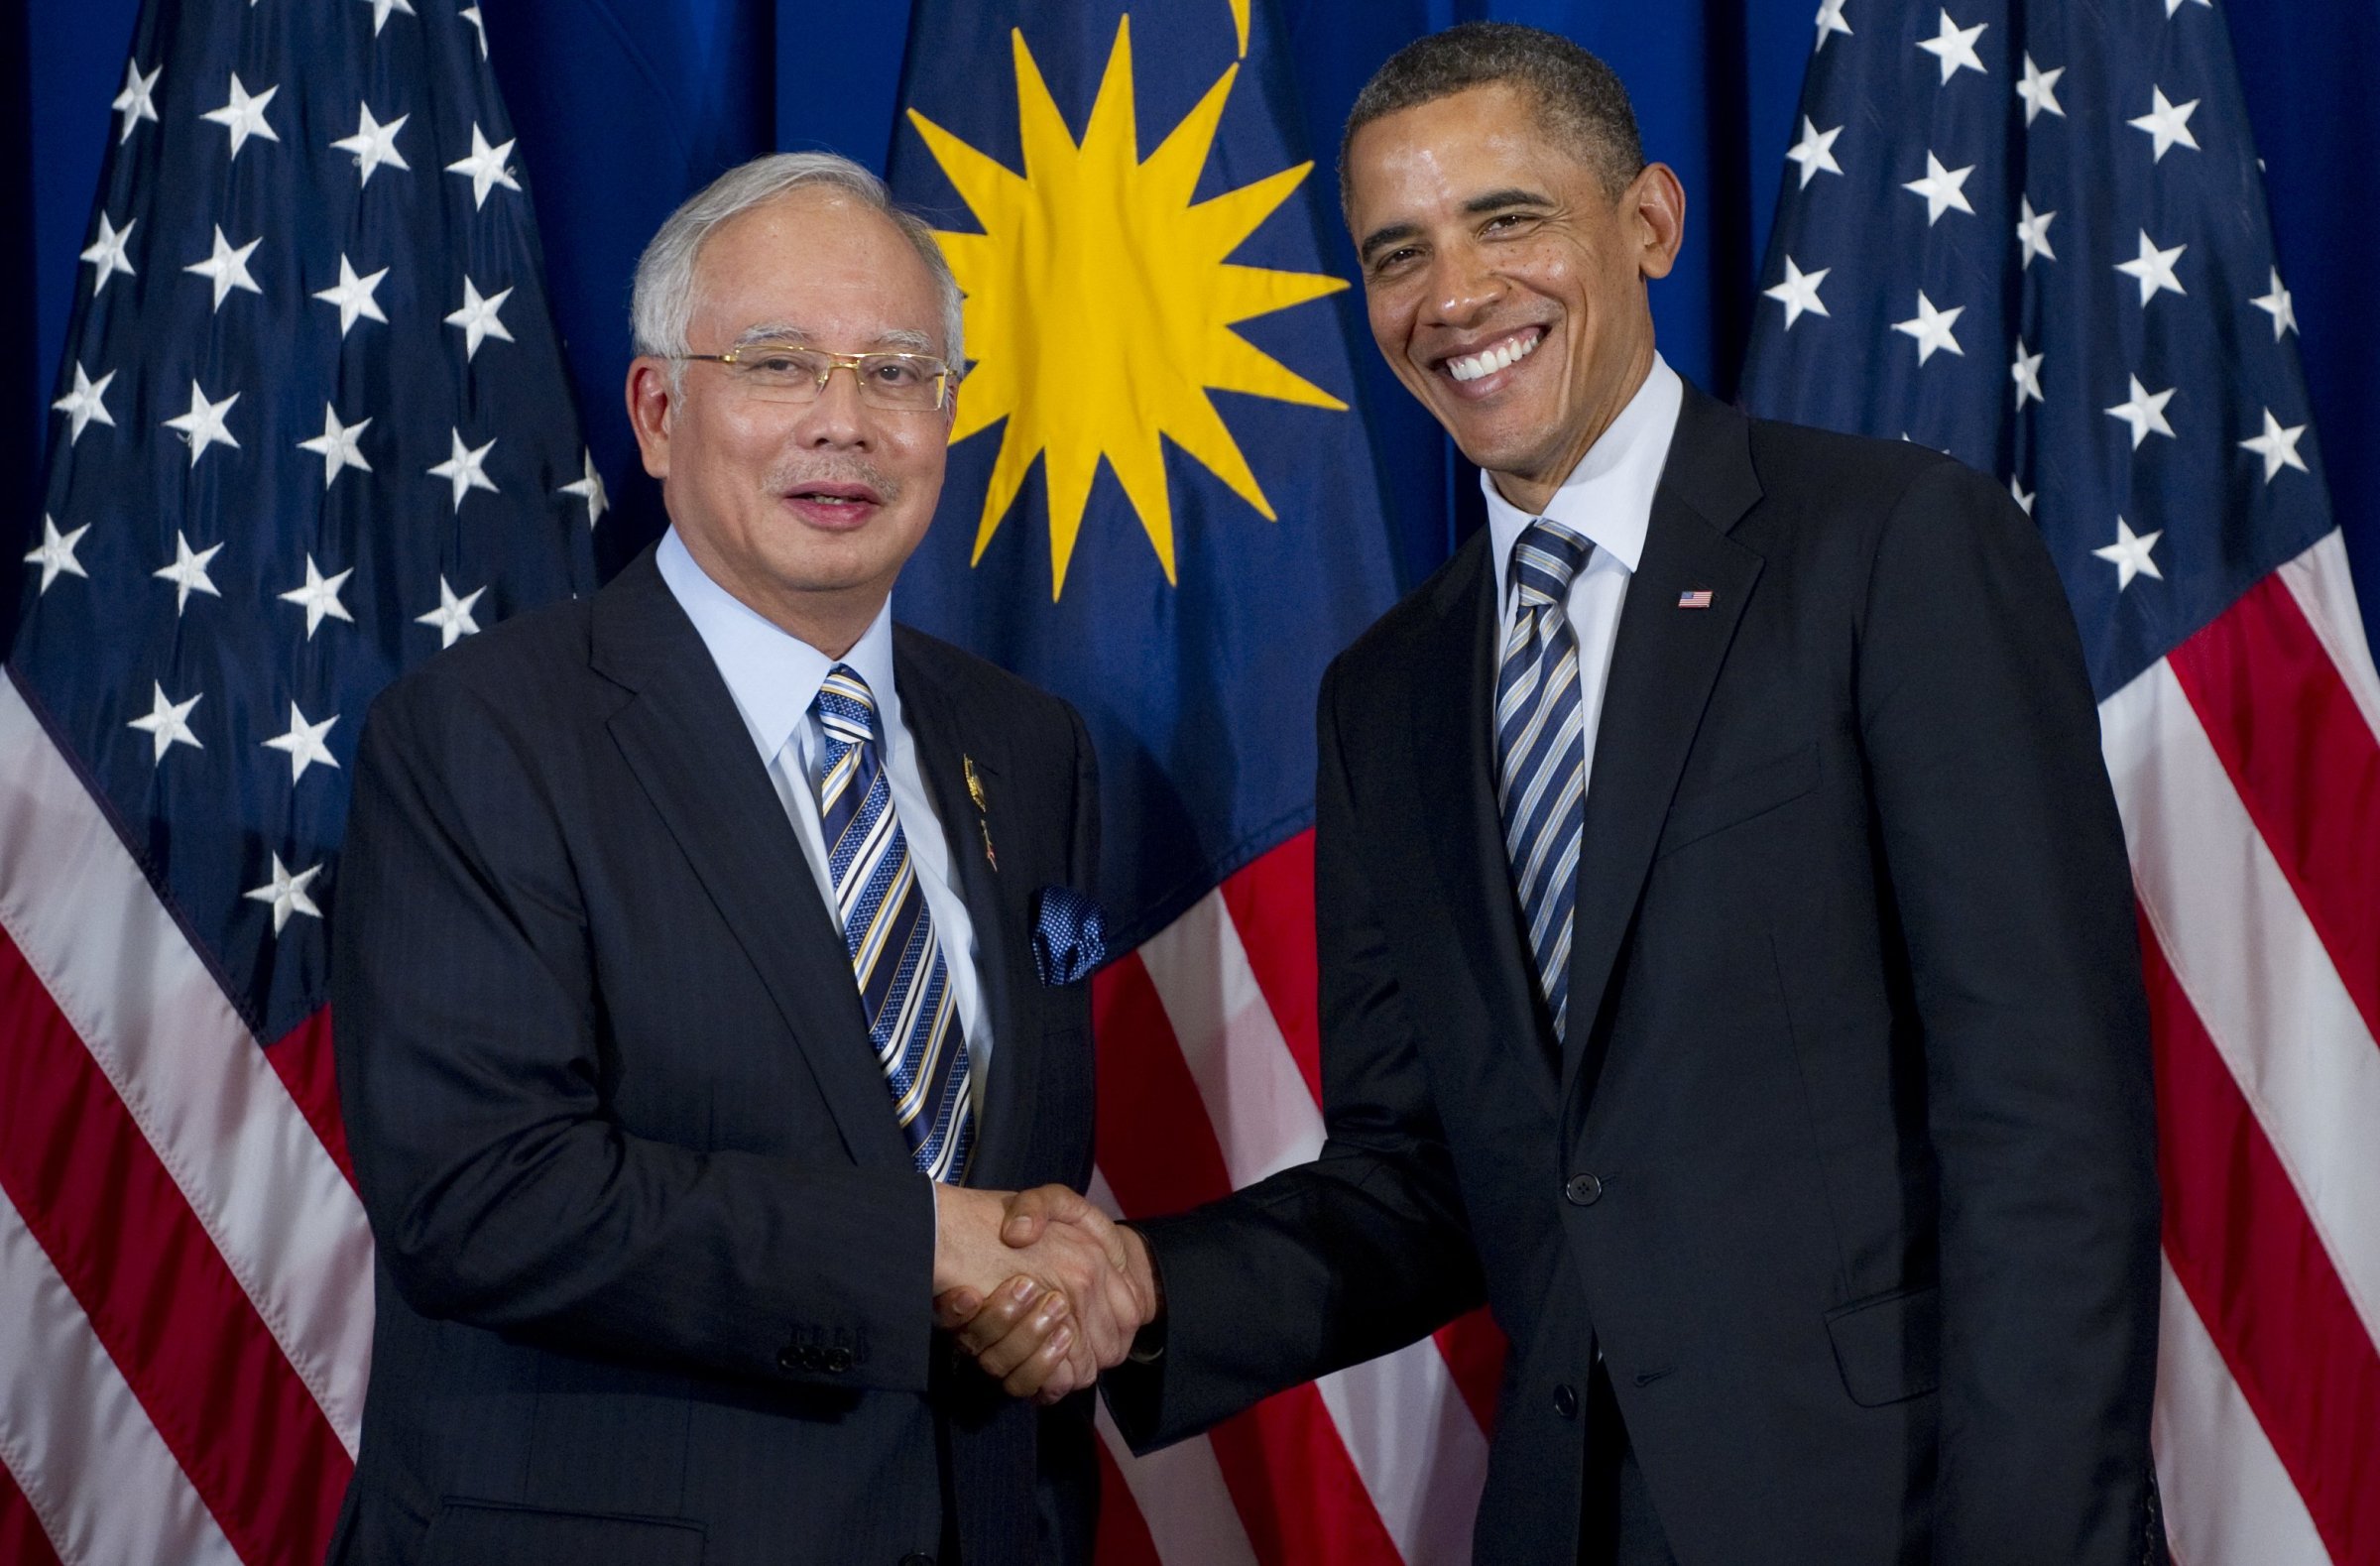 U.S. President Barack Obama shakes hands with Prime Minister Najib Razak of Malaysia during a meeting on the sidelines of the ASEAN and East Asia summits in Nusa Dua on Indonesia's resort island of Bali, on Nov. 18, 2011.